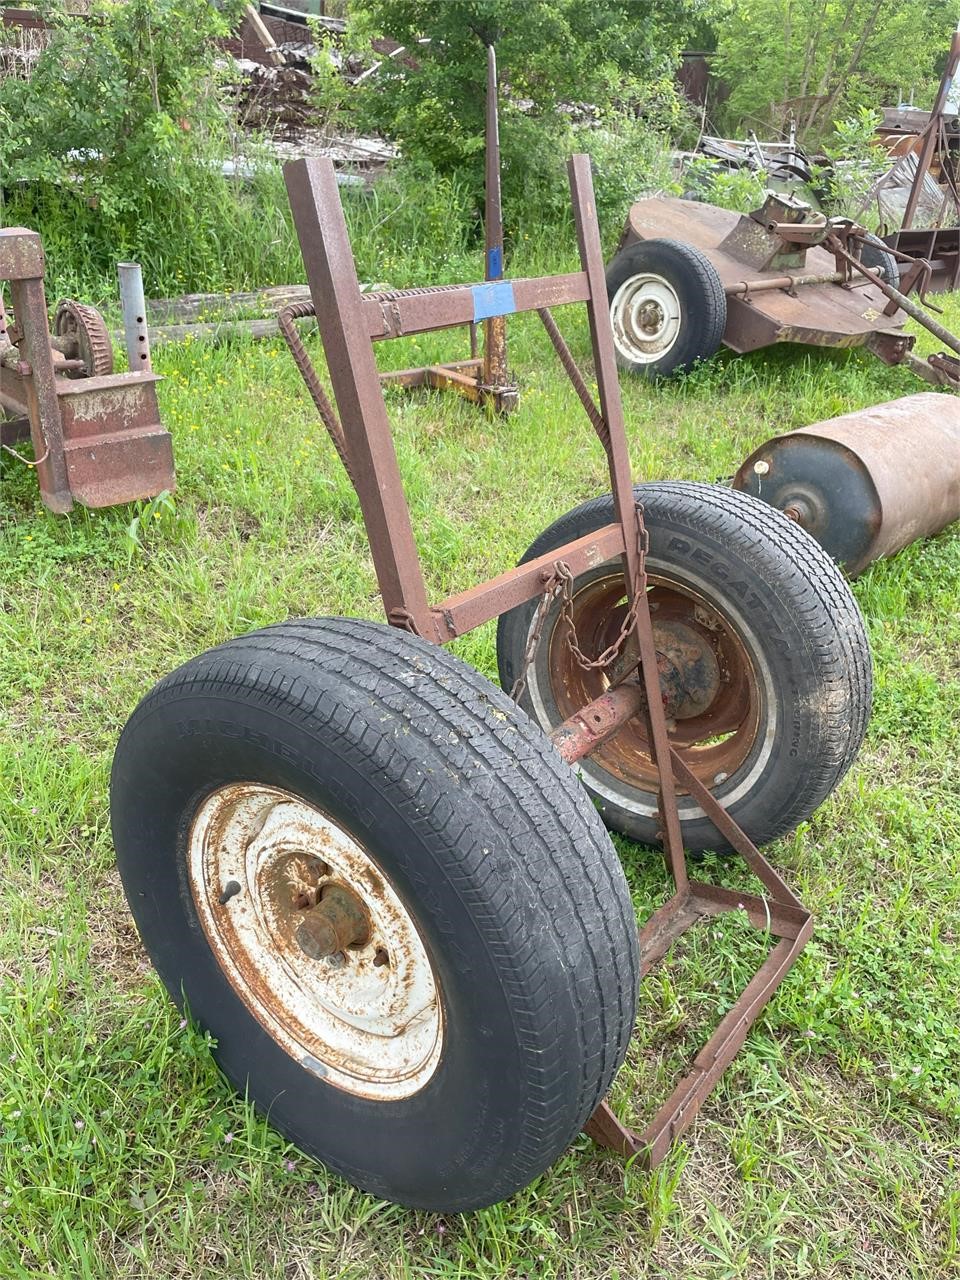 Shop Made Tank Carrier w/ Rubber Tires on Axle